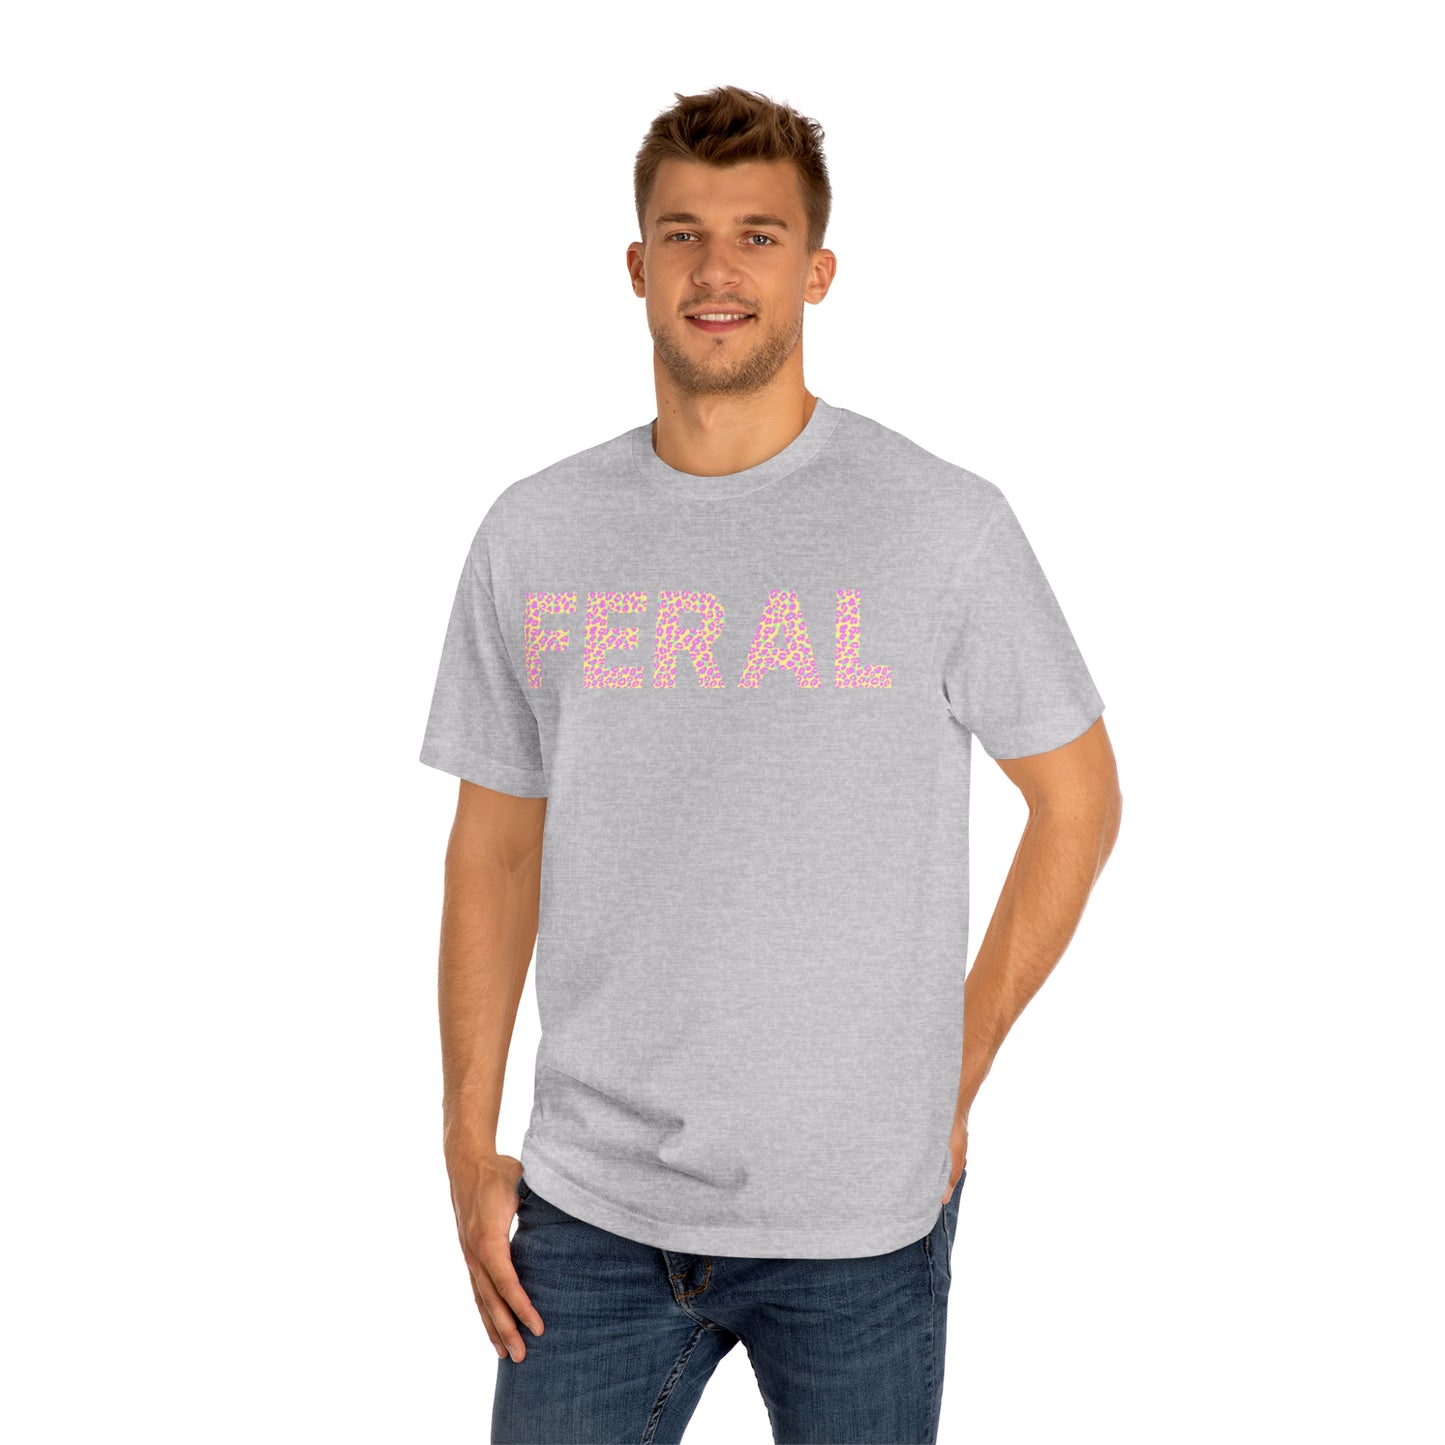 FERAL Neon Cheetah Lettering Unisex Classic Tee